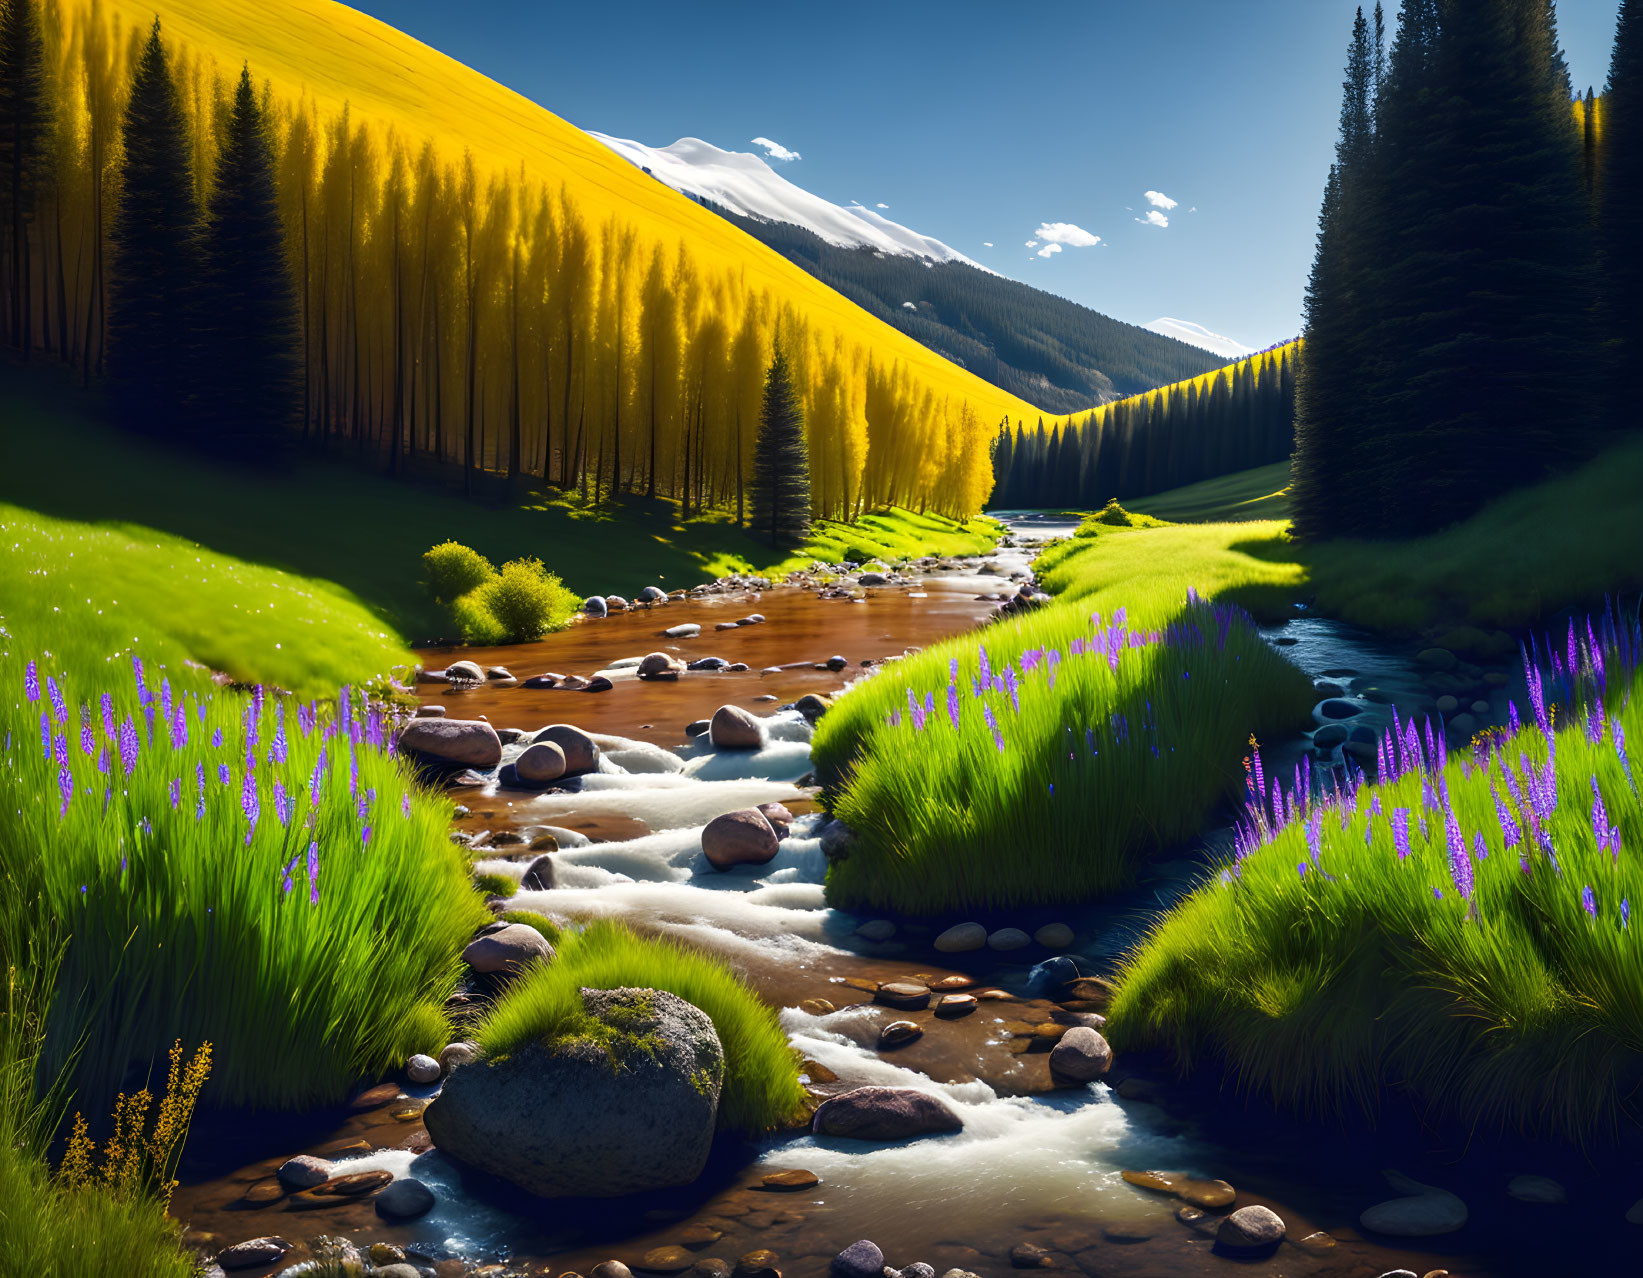 Tranquil river in vibrant valley with purple wildflowers and golden trees